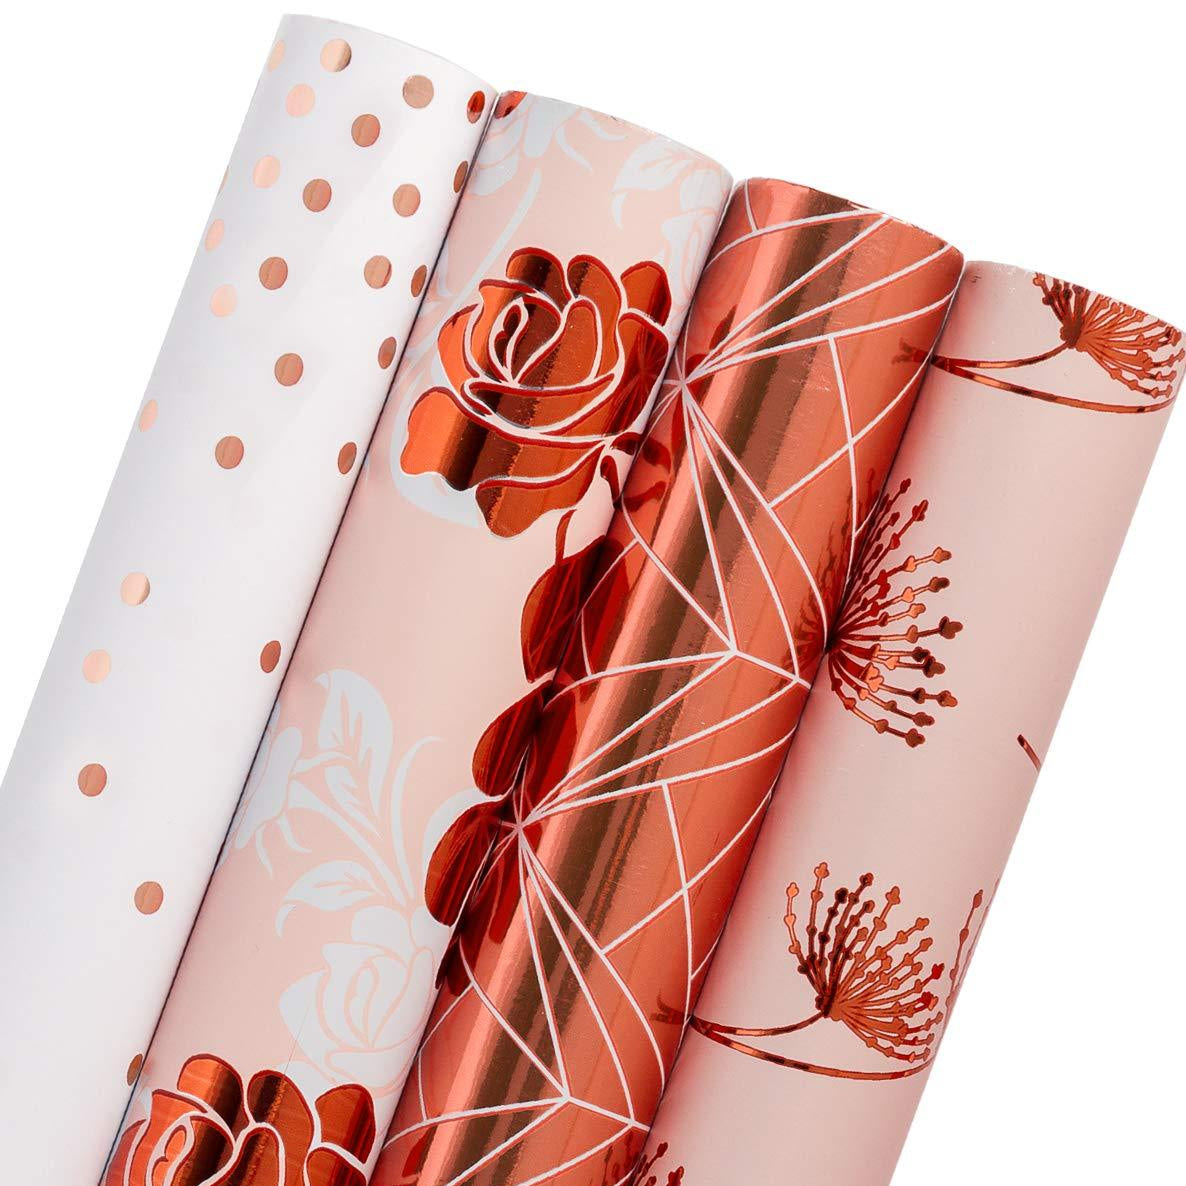 Present Gift Wrapping Paper Sheets Set Of 6,valentine's Day Heart